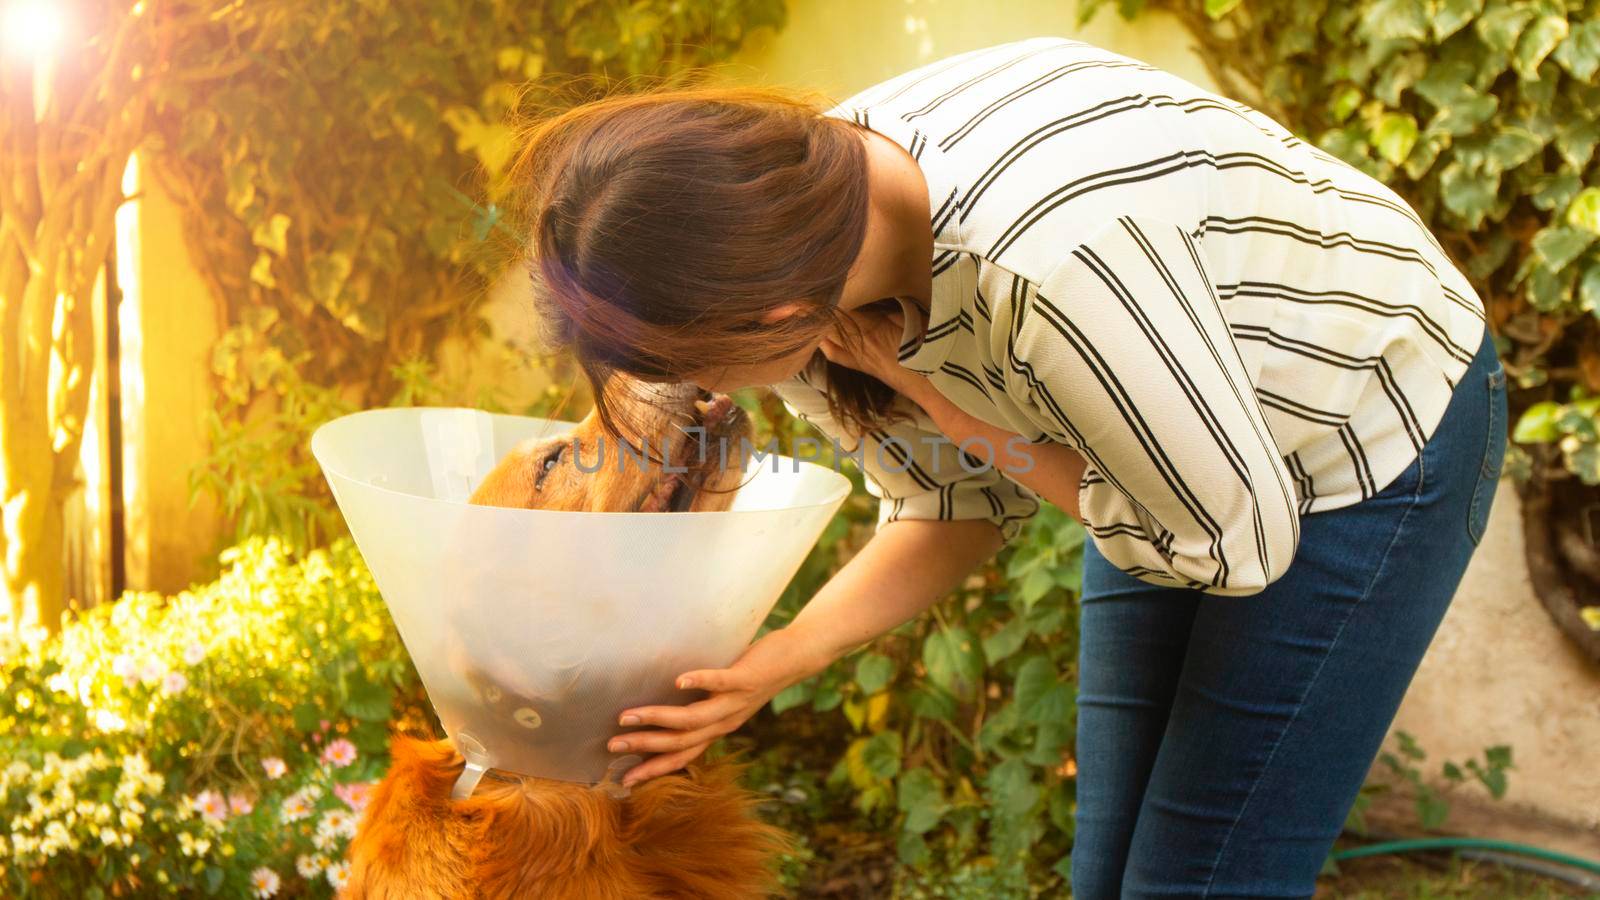 Beautiful Hispanic young woman kissing her injured Golden Retriever dog with a plastic cone on her neck in her backyard during sunset